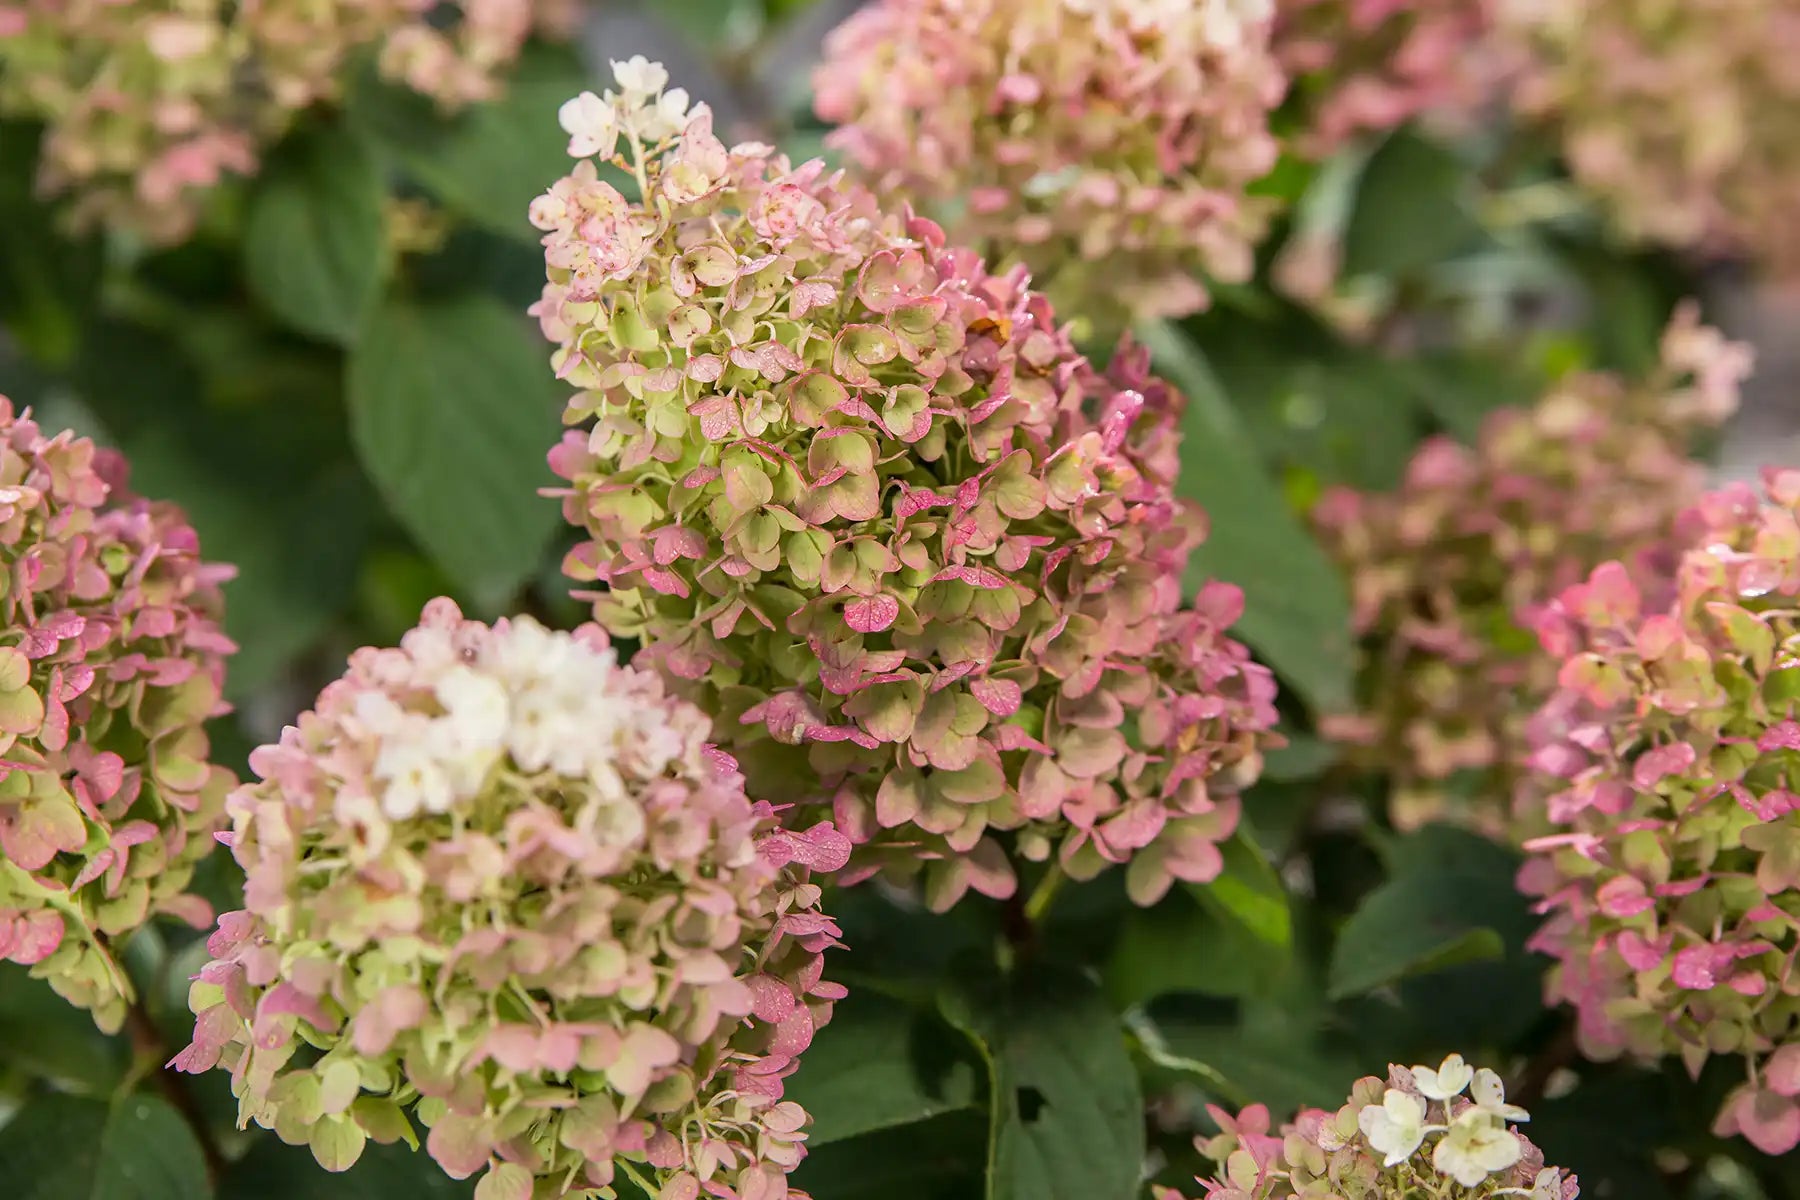 Little Hottie® displays its green, pink-tinged panicle flowers  in closeup.